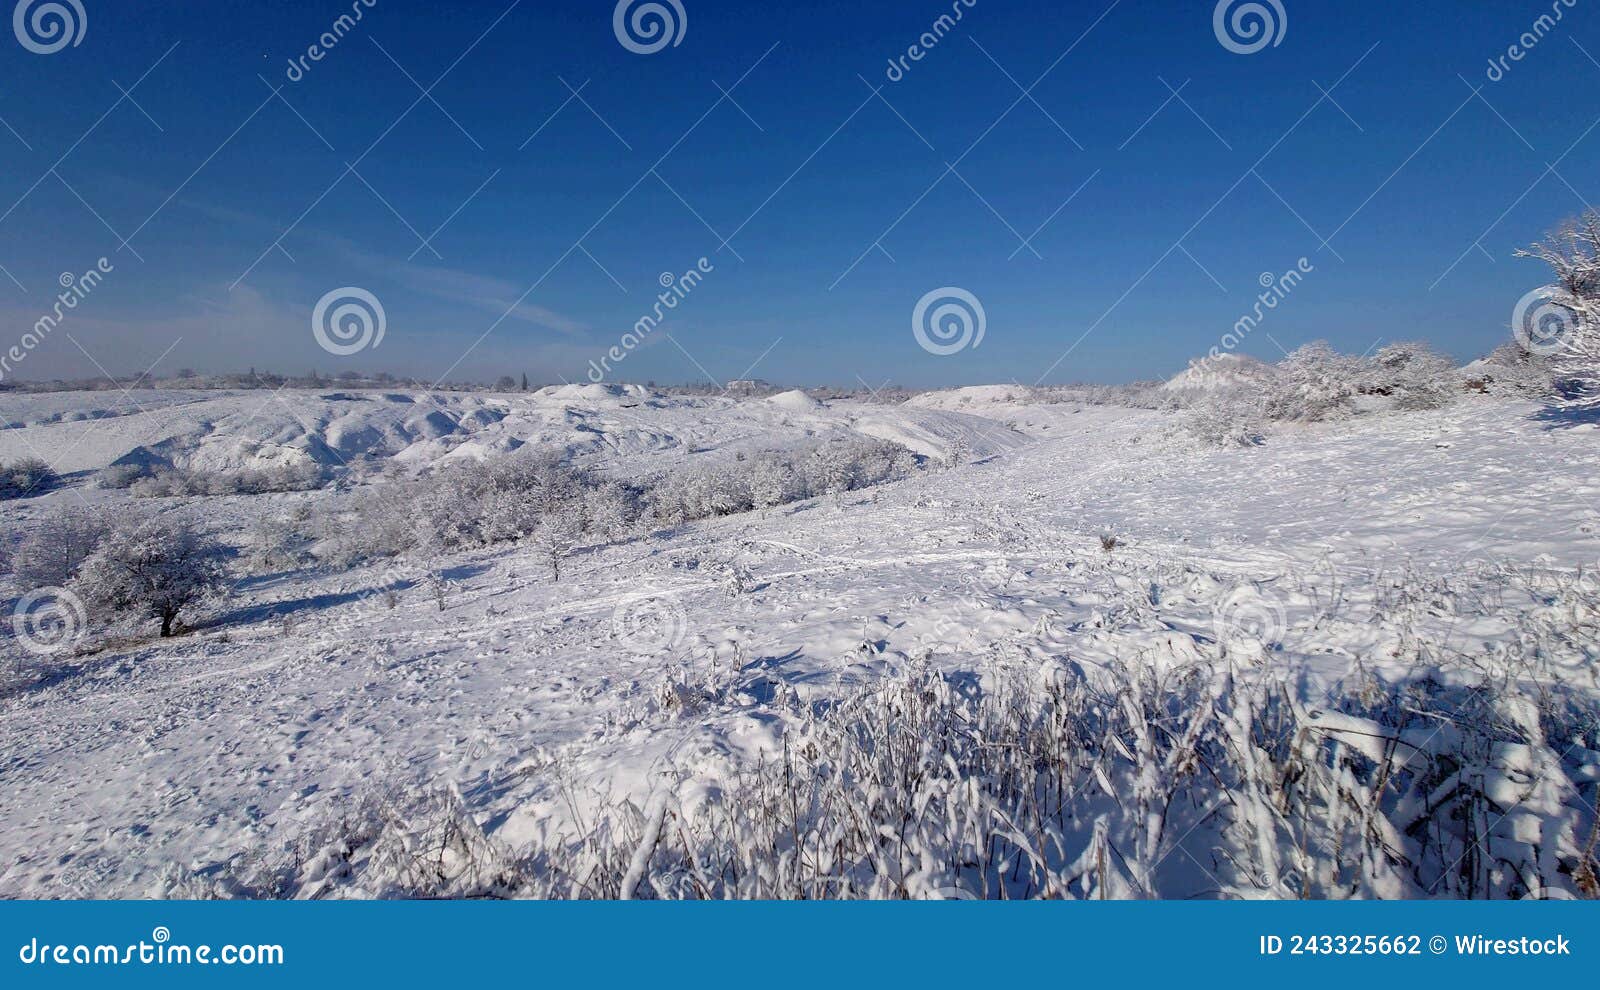 view of waste heaps covered in snow under a blue sky in donbas, ukraine